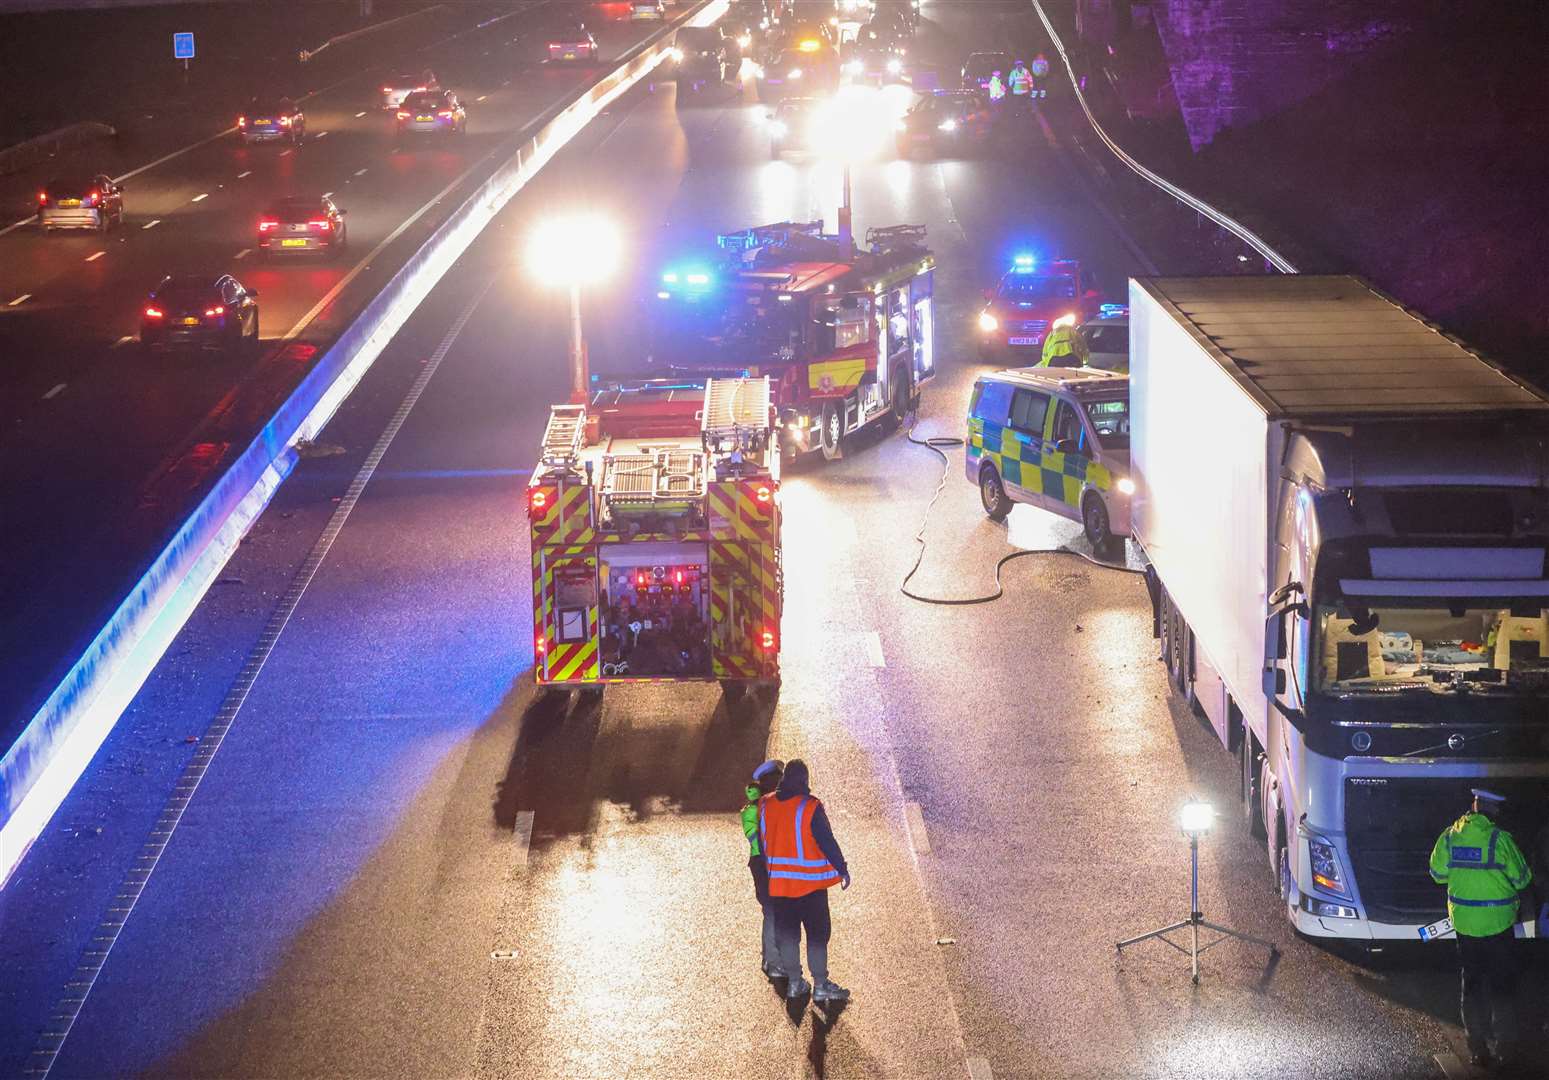 The London-bound carriageway was shut for 12 hours. Picture: UKNIP